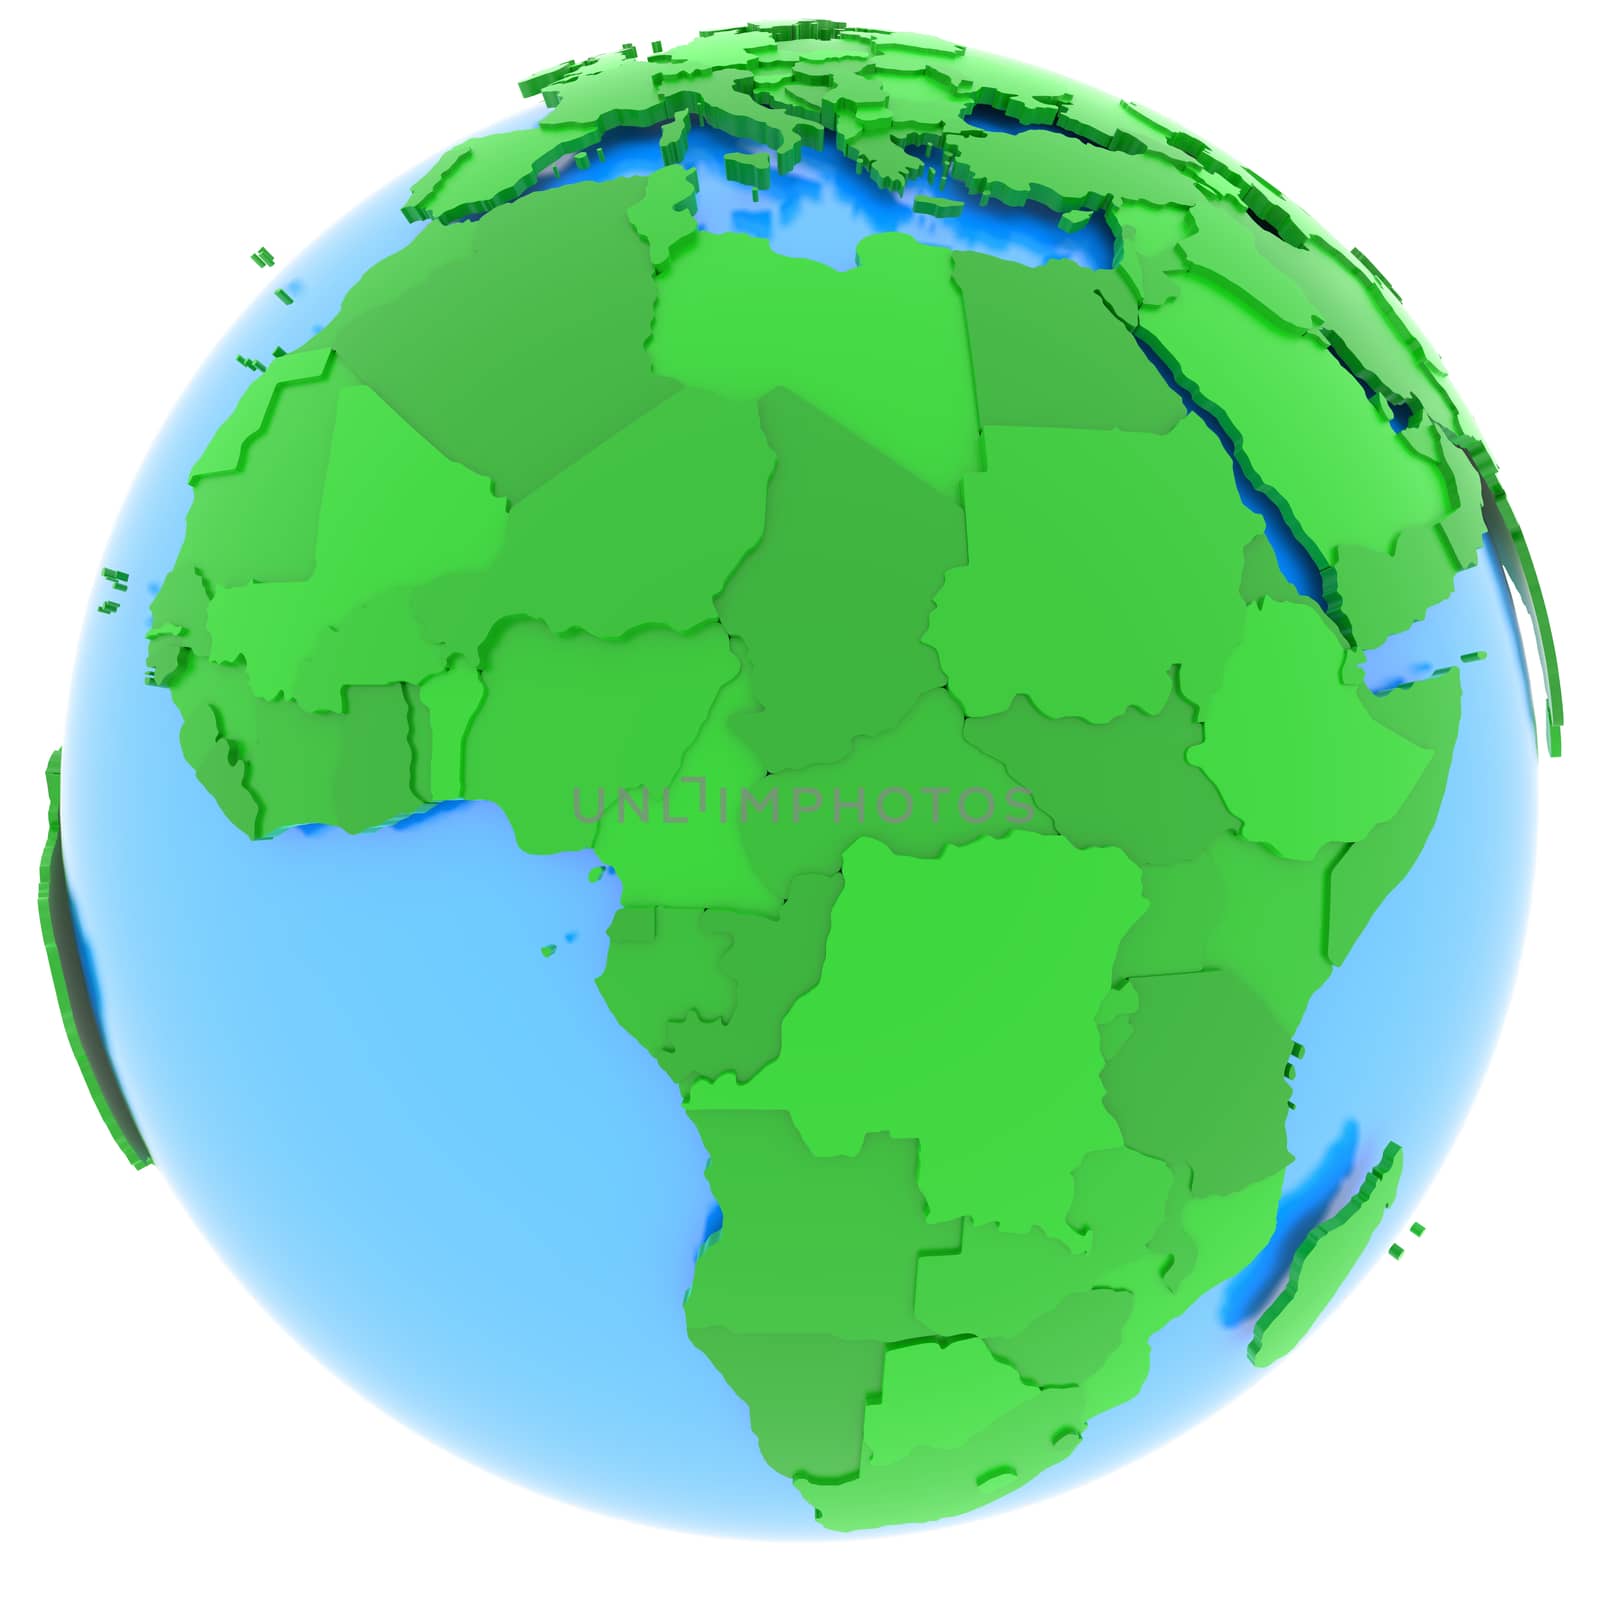 Political map of Africa with countries in different shades of green, isolated on white background. 